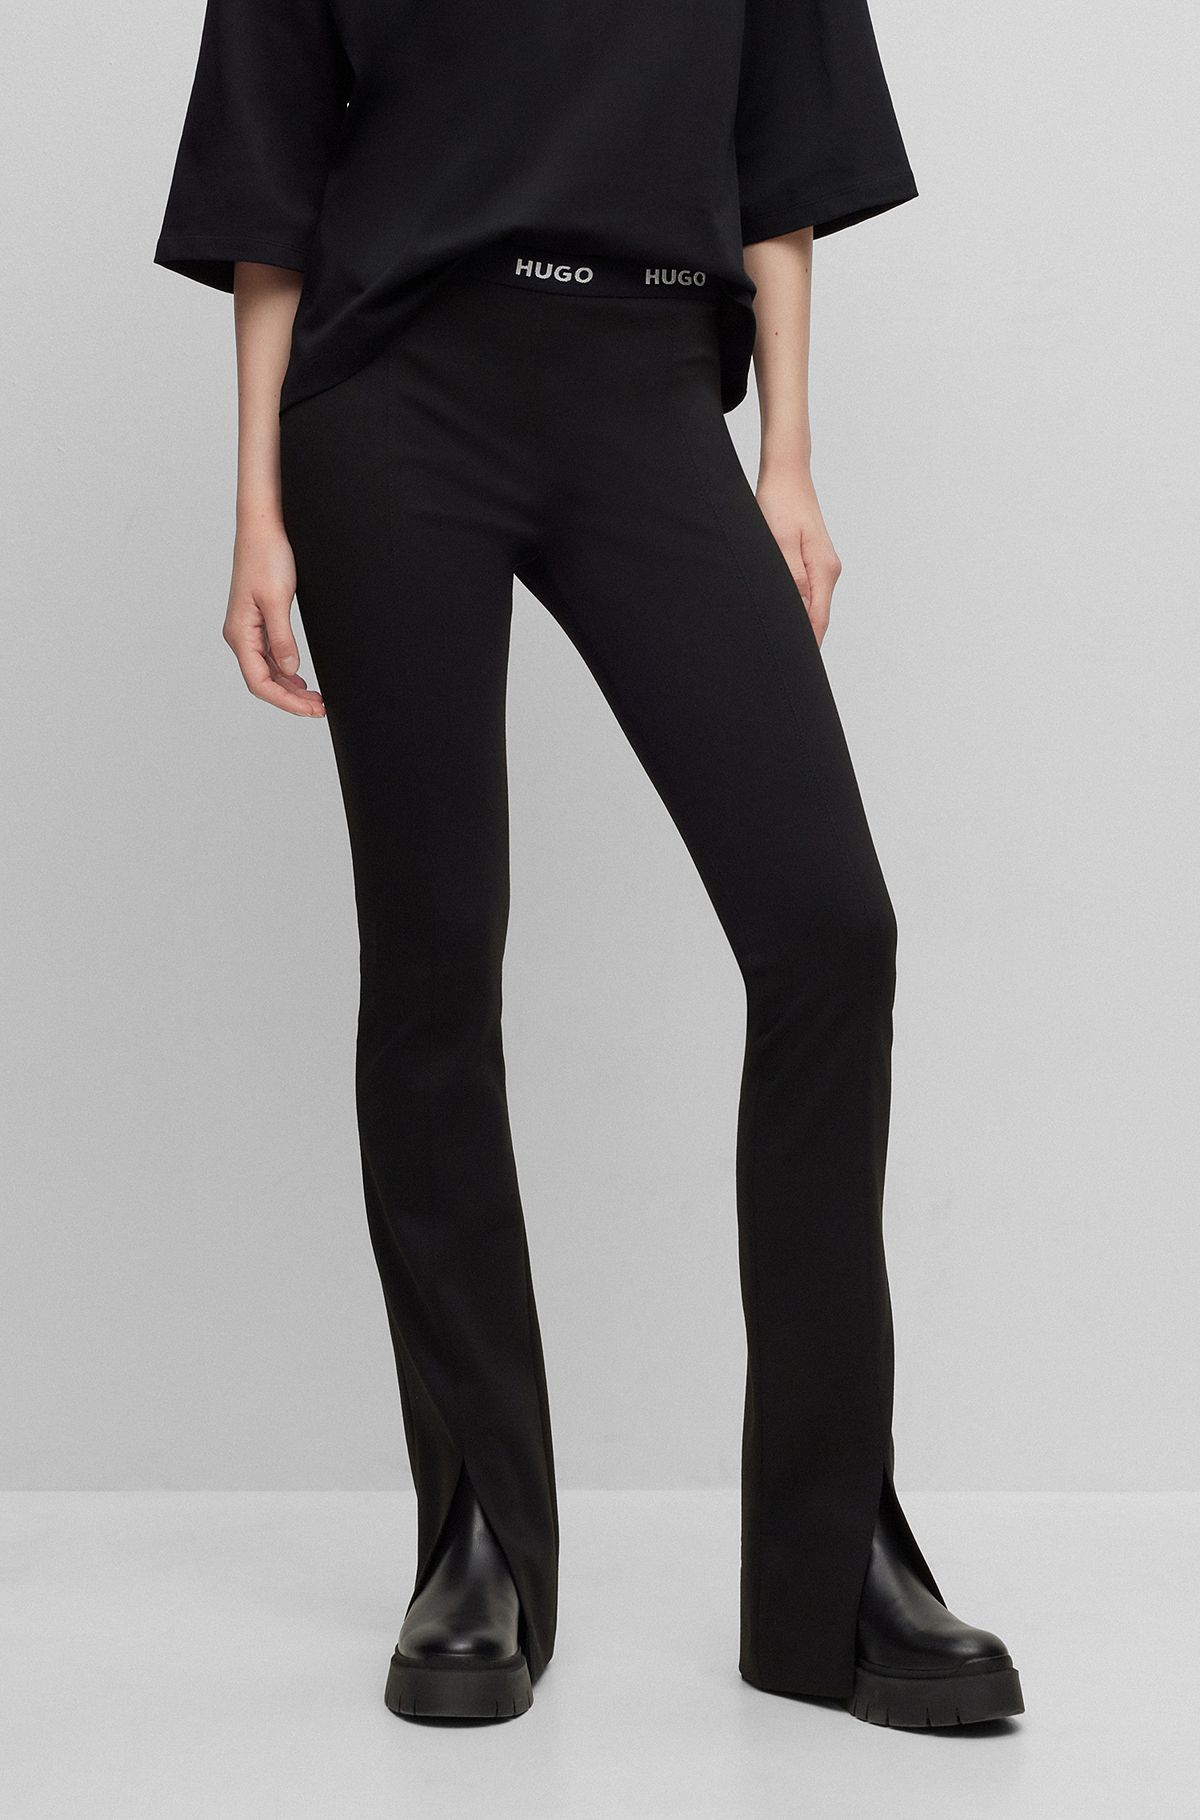 HUGO - Slim-fit trousers in stretch fabric with slit hems